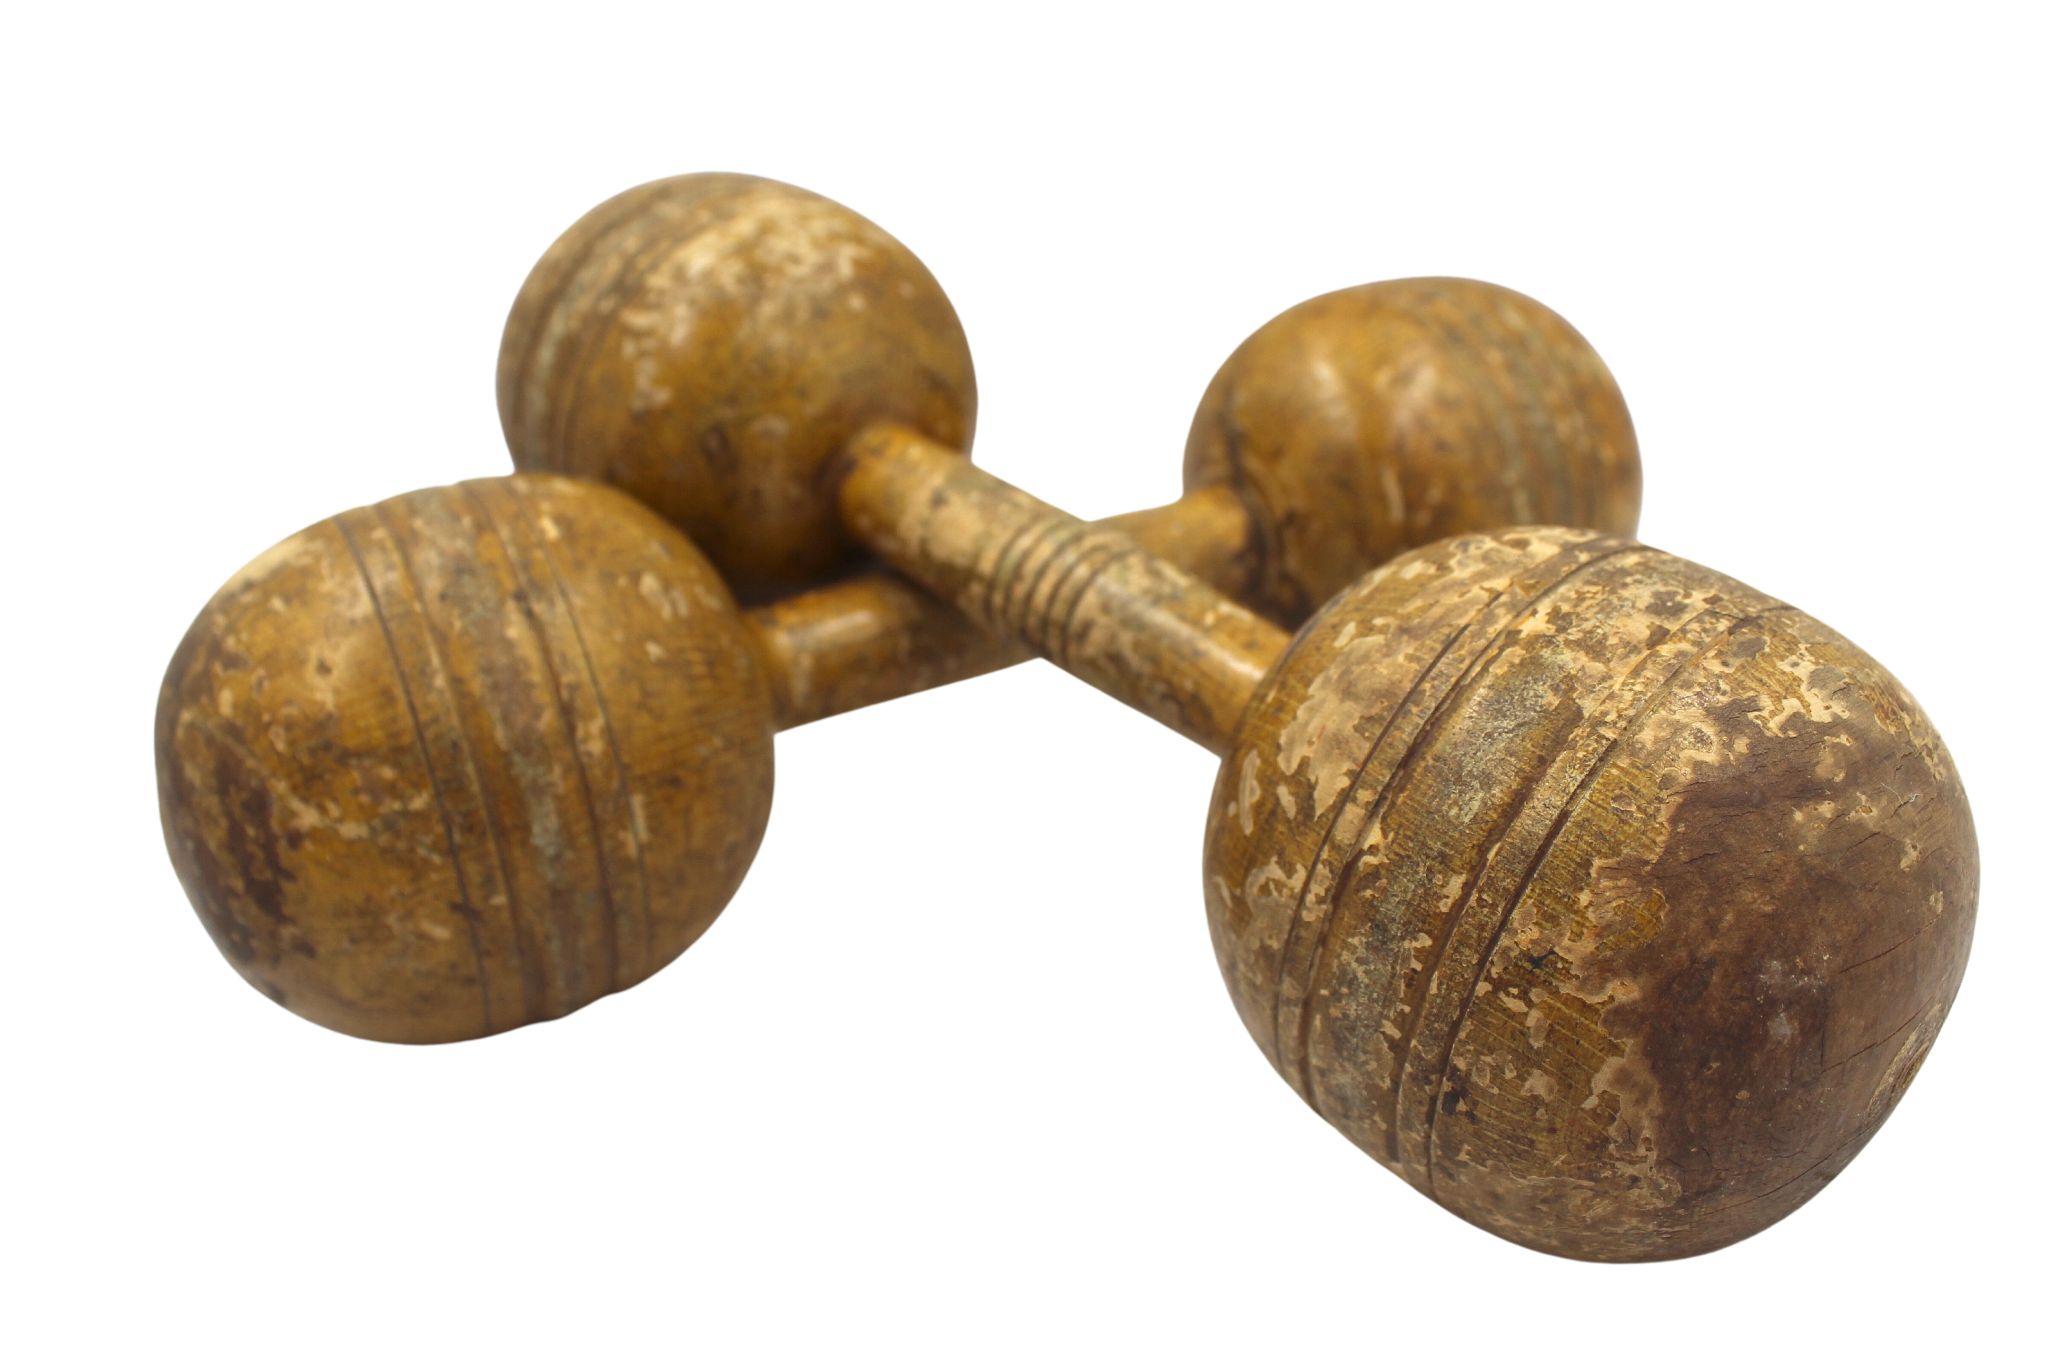 Presented is a set of vintage wooden dumbbells. The dumbbells are fixed-weight and constructed of hand-turned solid wood. They have incised lines at center for grip and around the balls for ornamentation and to keep the dumbbells from rolling. A